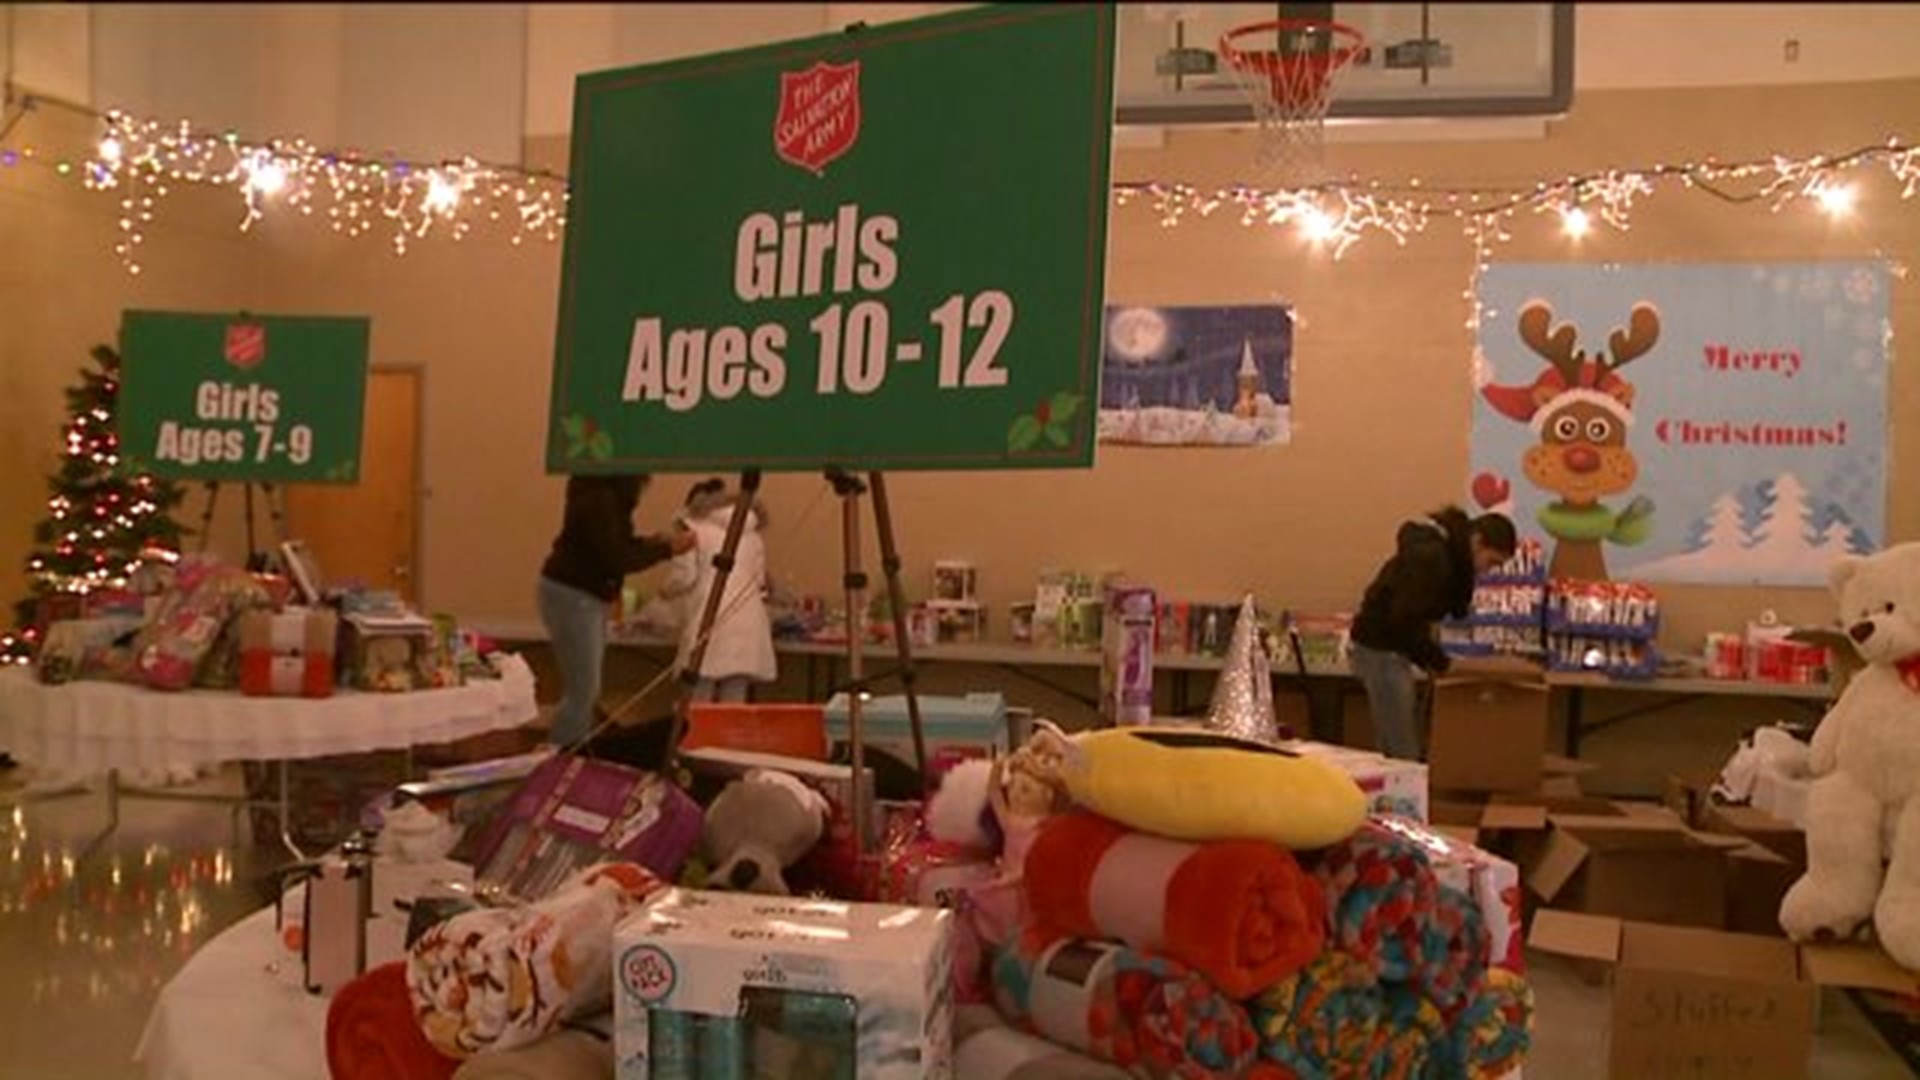 East Stroudsburg Salvation Army Ready to Distribute Toys For Toys